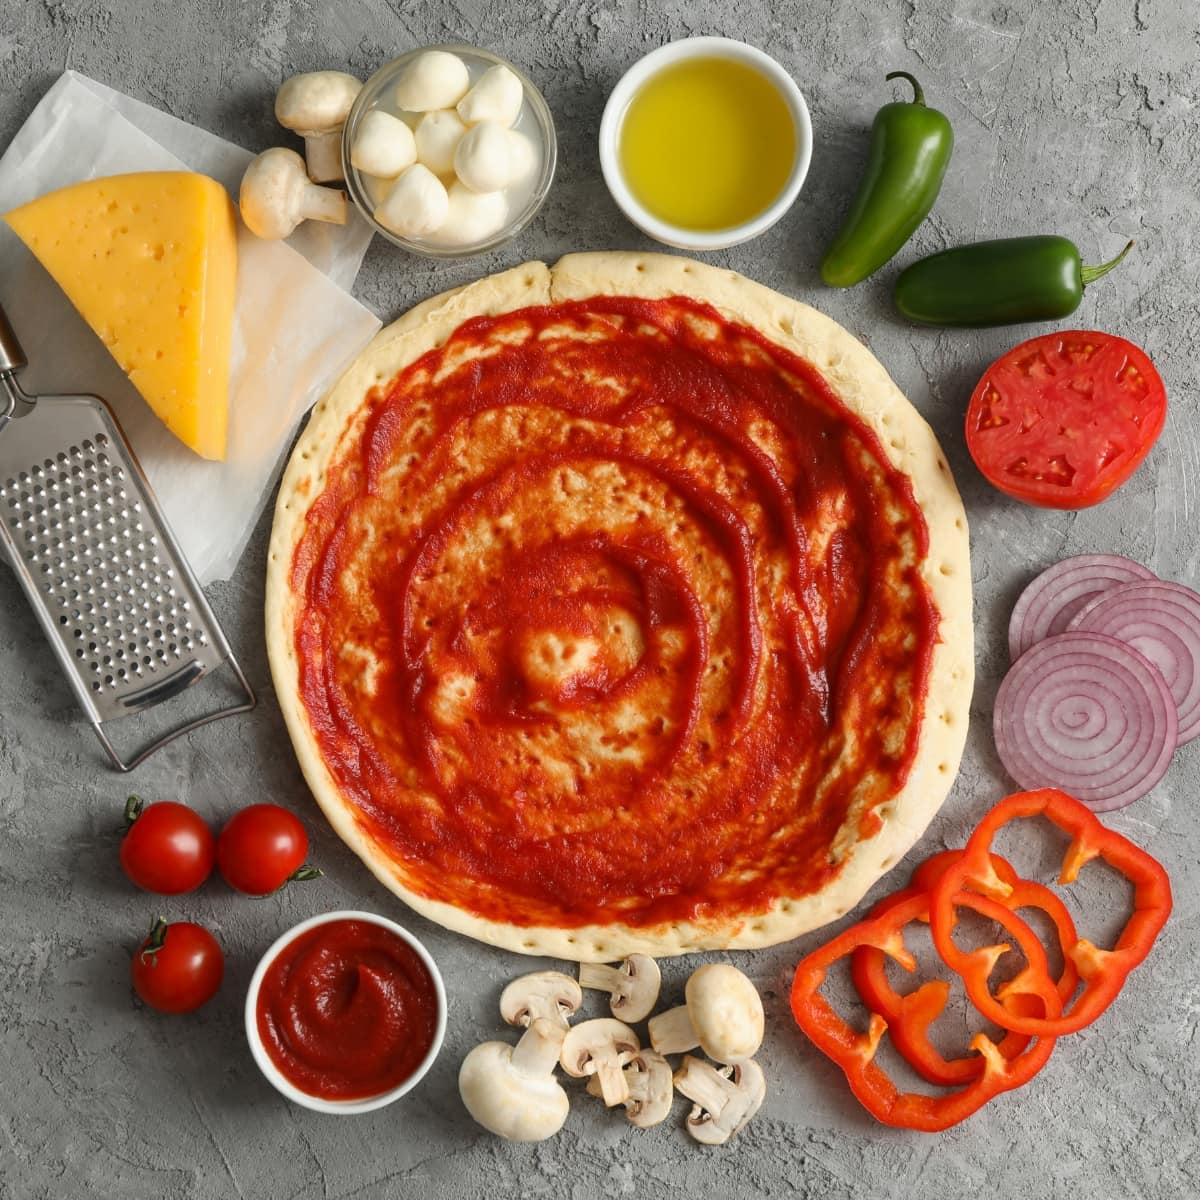 Homemade Pizza Ingredients- Homemade Crust Dough, Red Sauce, Block of Cheddar Cheese with Grater, Jalapenos, Red Onion Slices, Mushrooms, Tomatoes, Bell Peppers, Butter, and Mozzarella